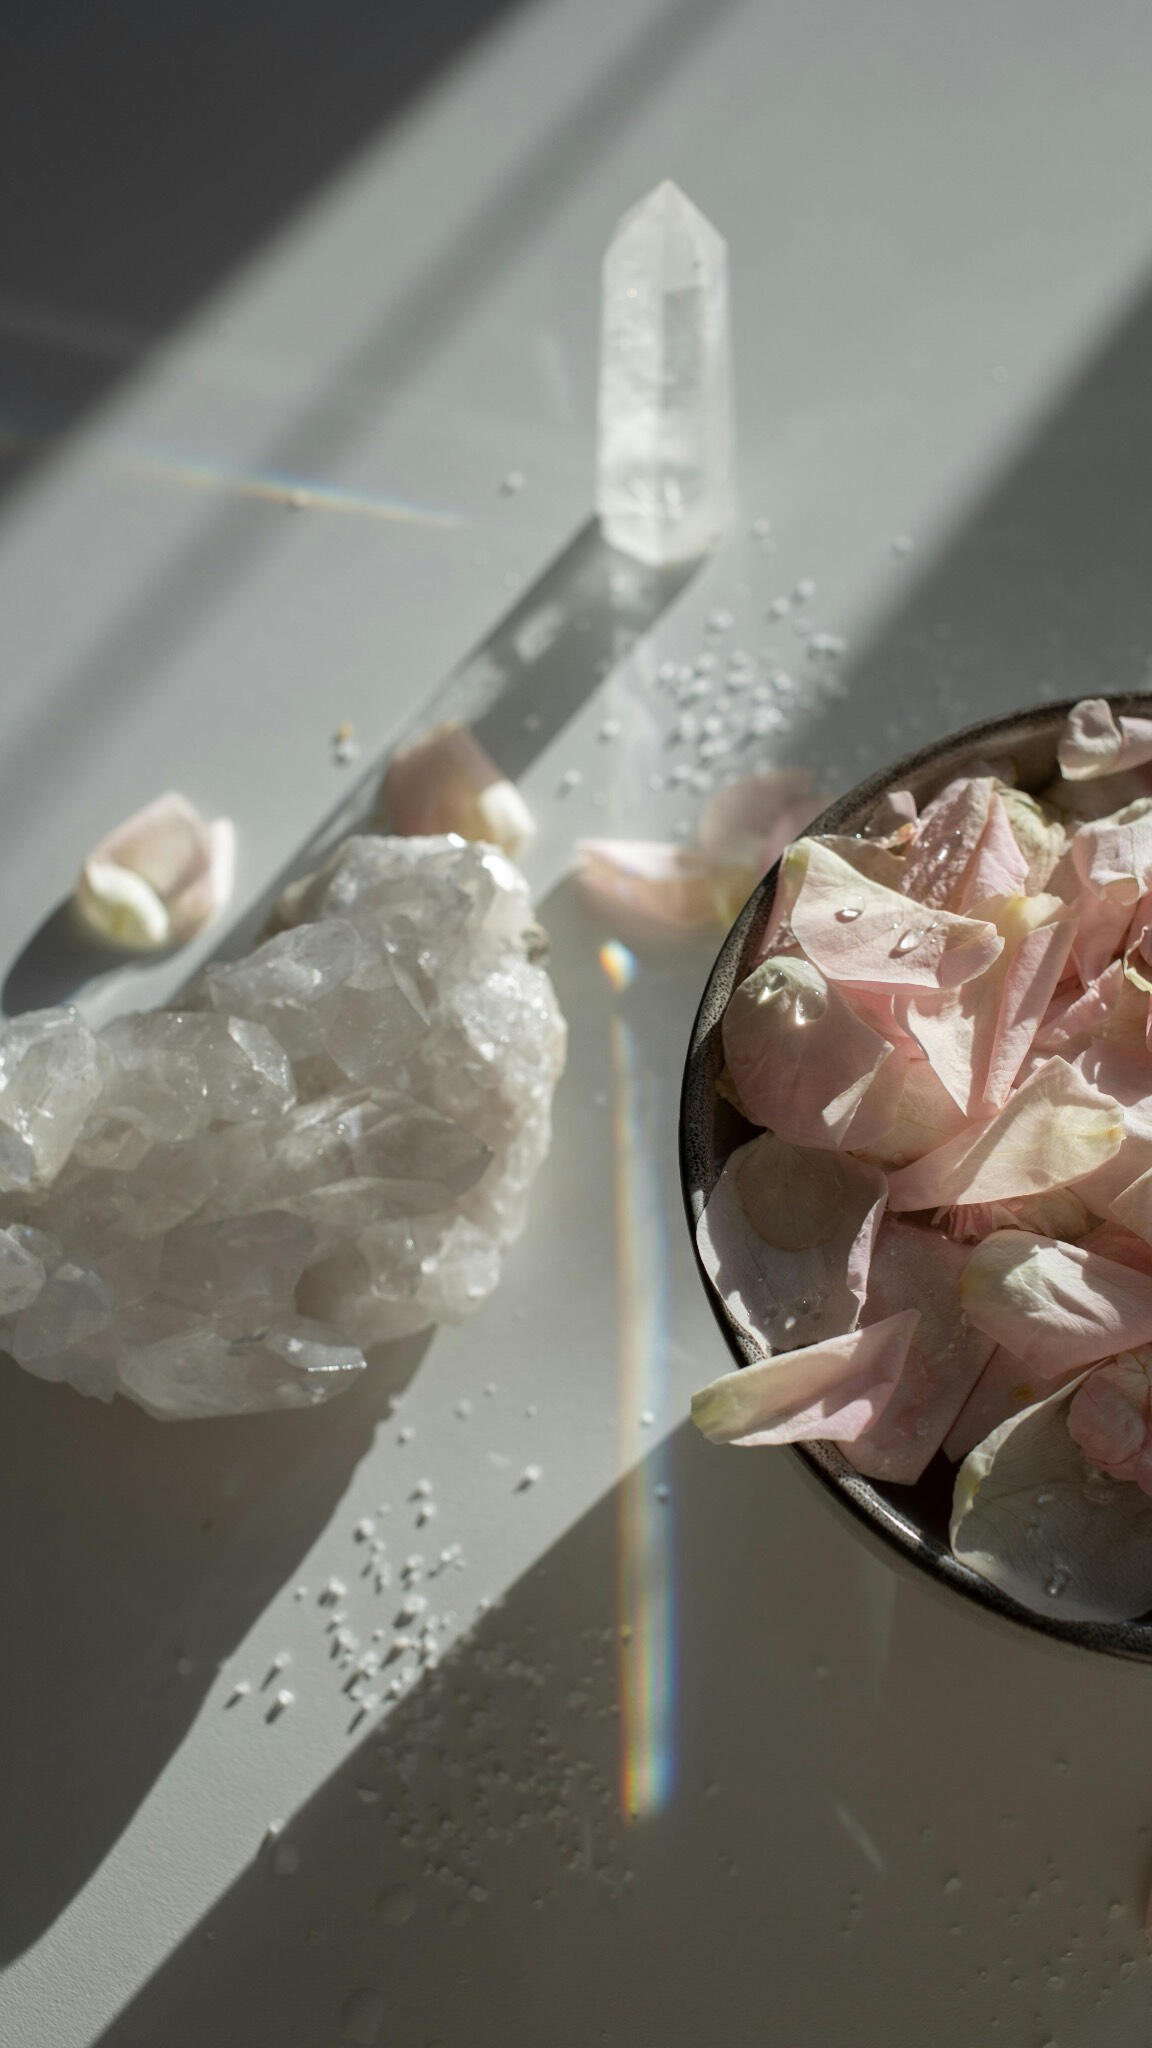 This is a photo of a Clear Quartz crystal alongside a bowl of pink rose petals.